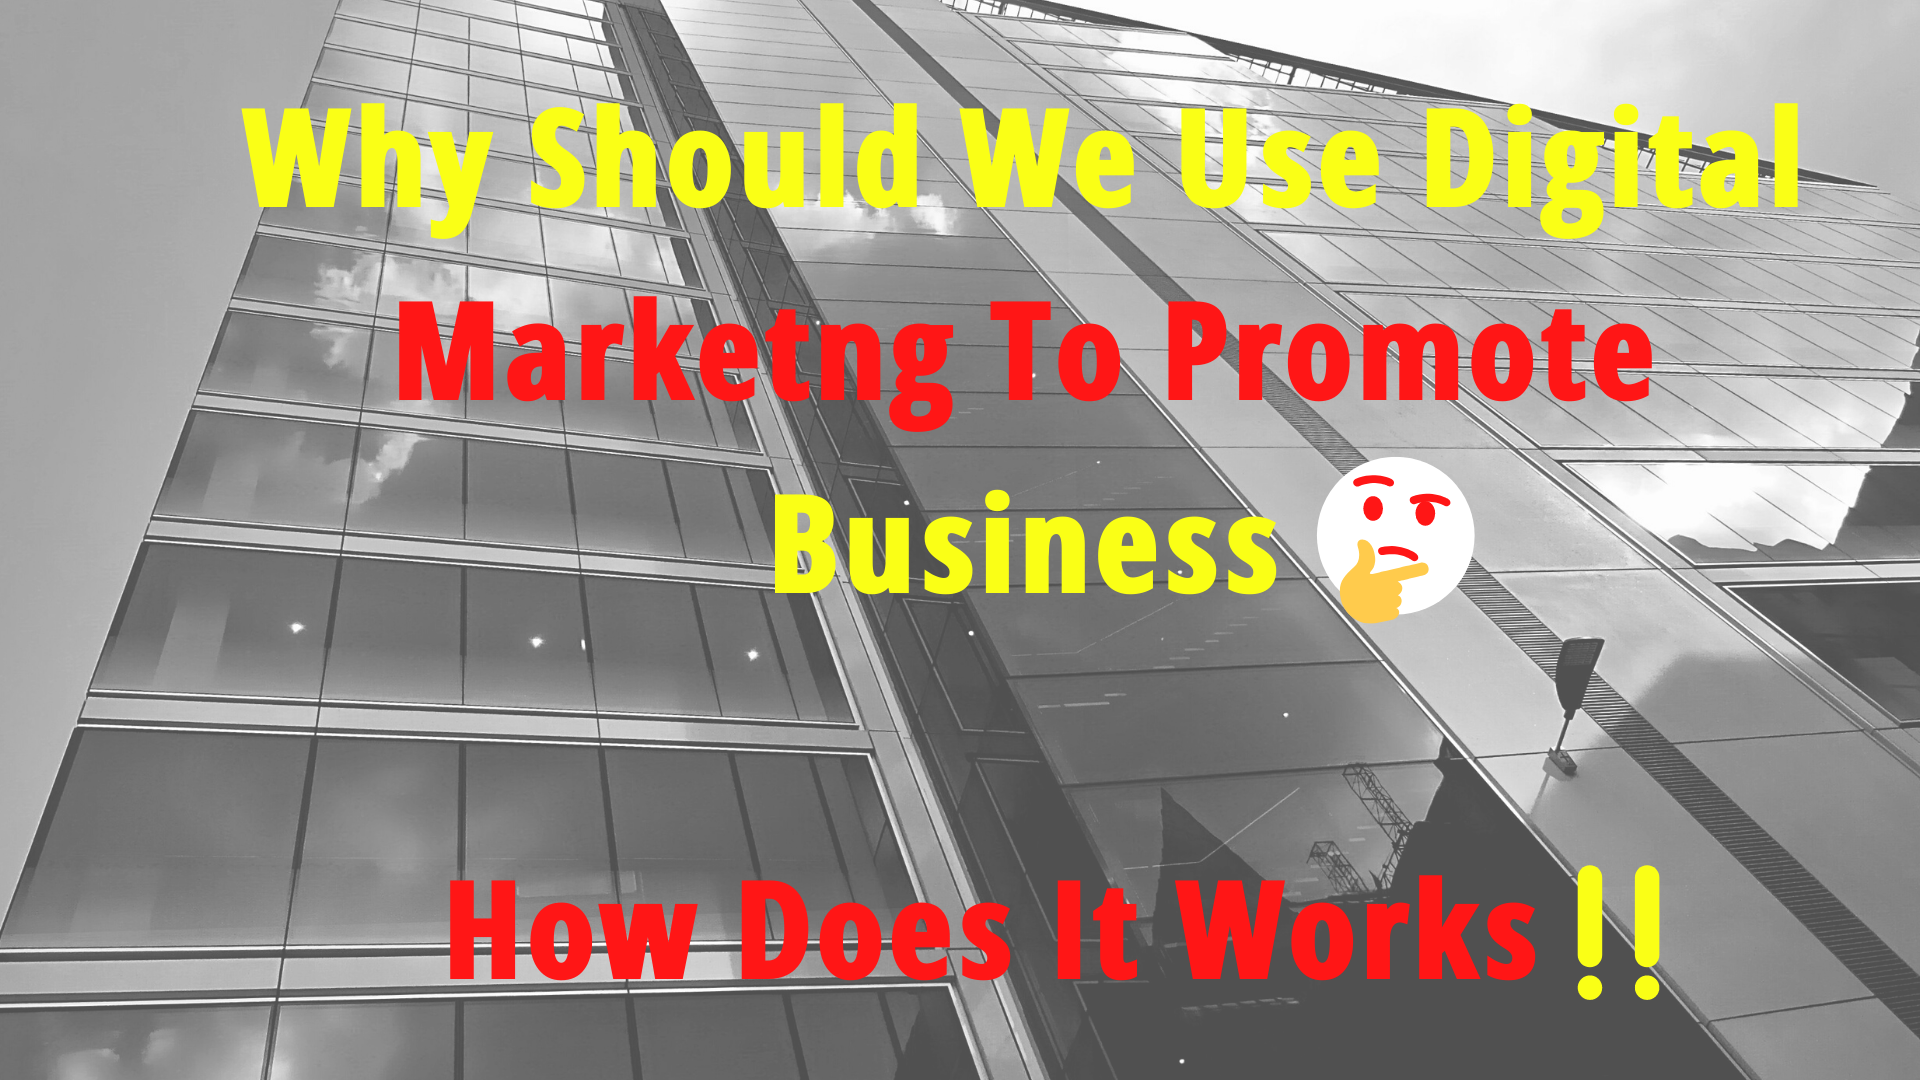 why-should-we-use-digital-marketng-to-promote-business